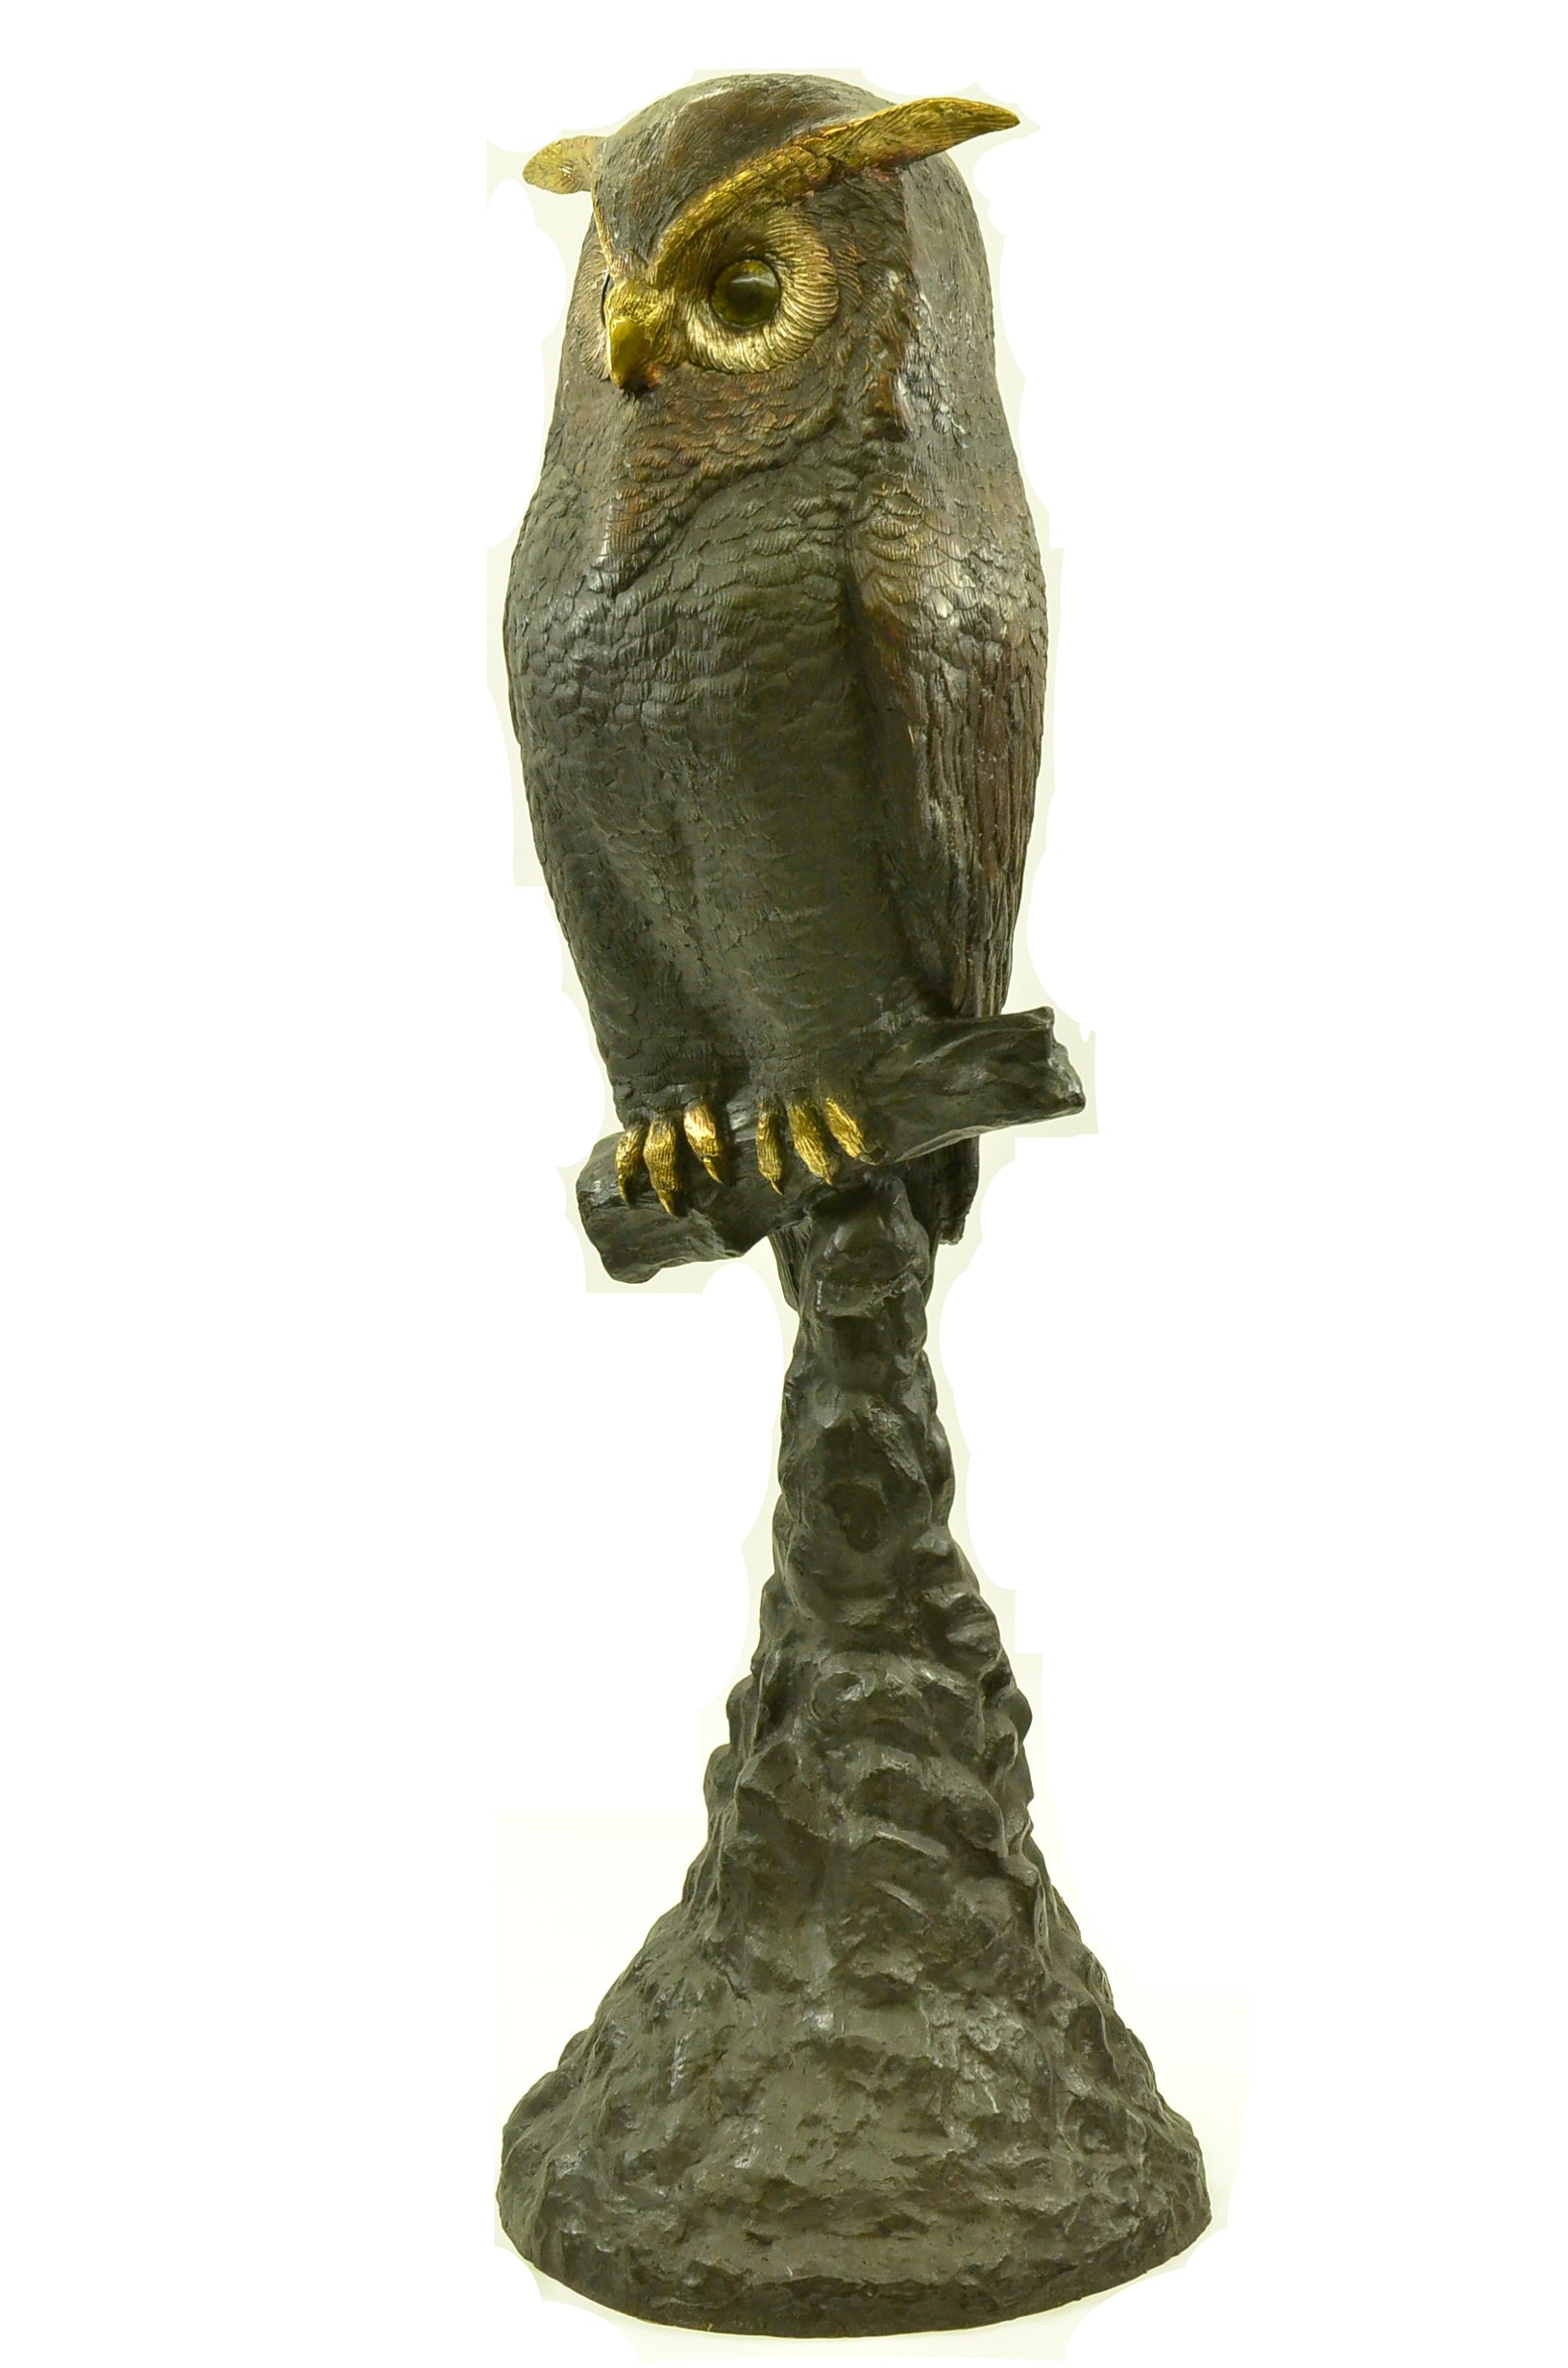 55"H Owl Lost Wax Bronze Sculpture by Nardini Extra Large Size Figurine Figure